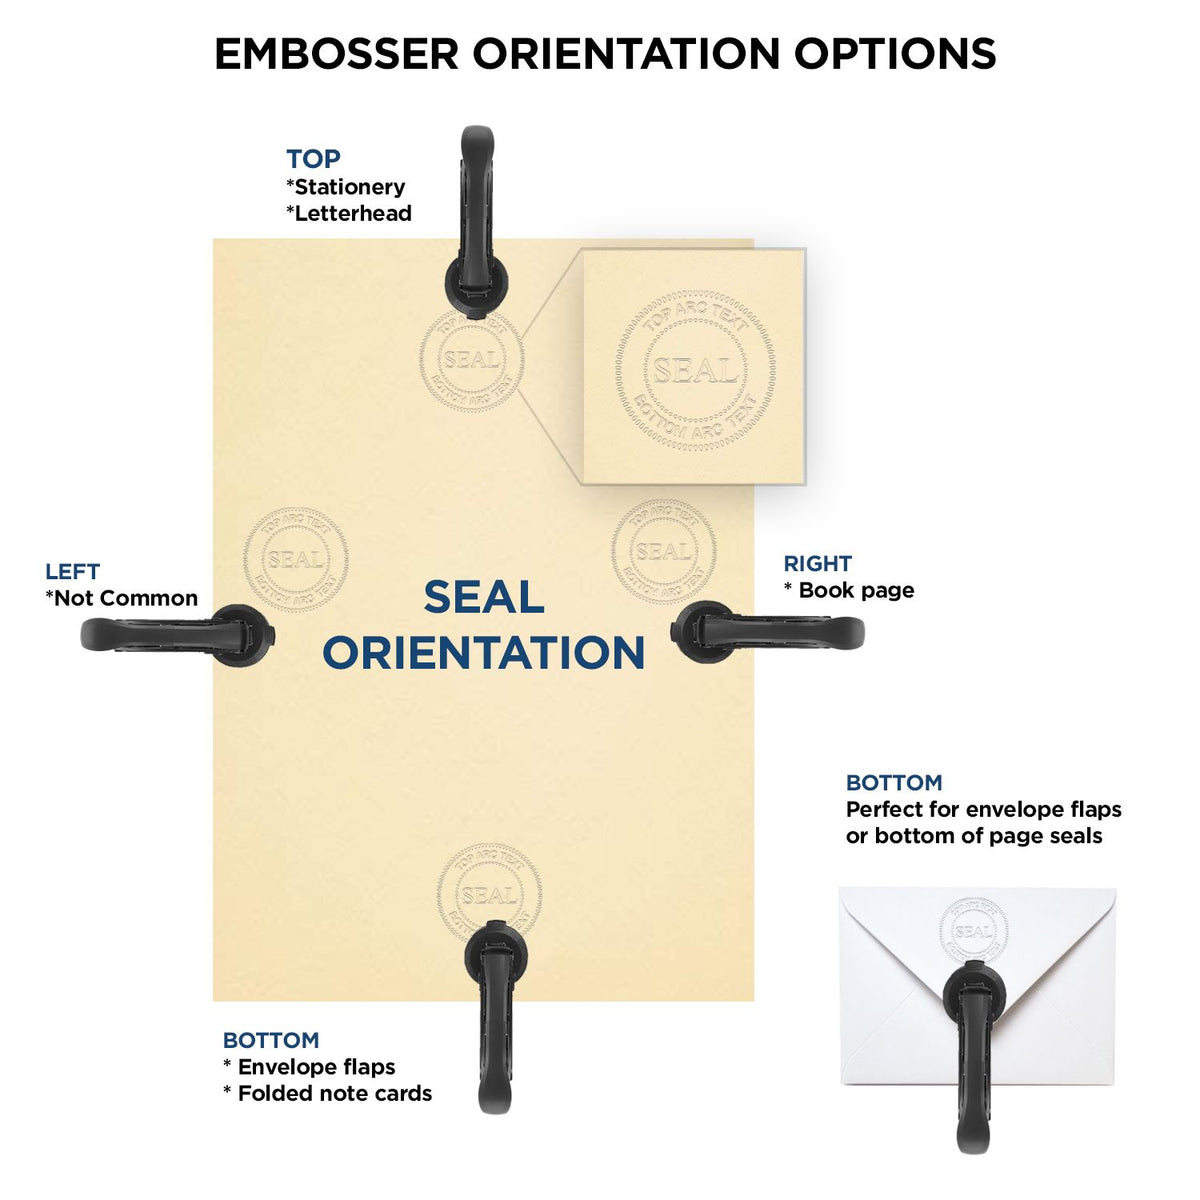 An infographic for the Long Reach Delaware PE Seal showing embosser orientation, this is showing examples of a top, bottom, right and left insert.